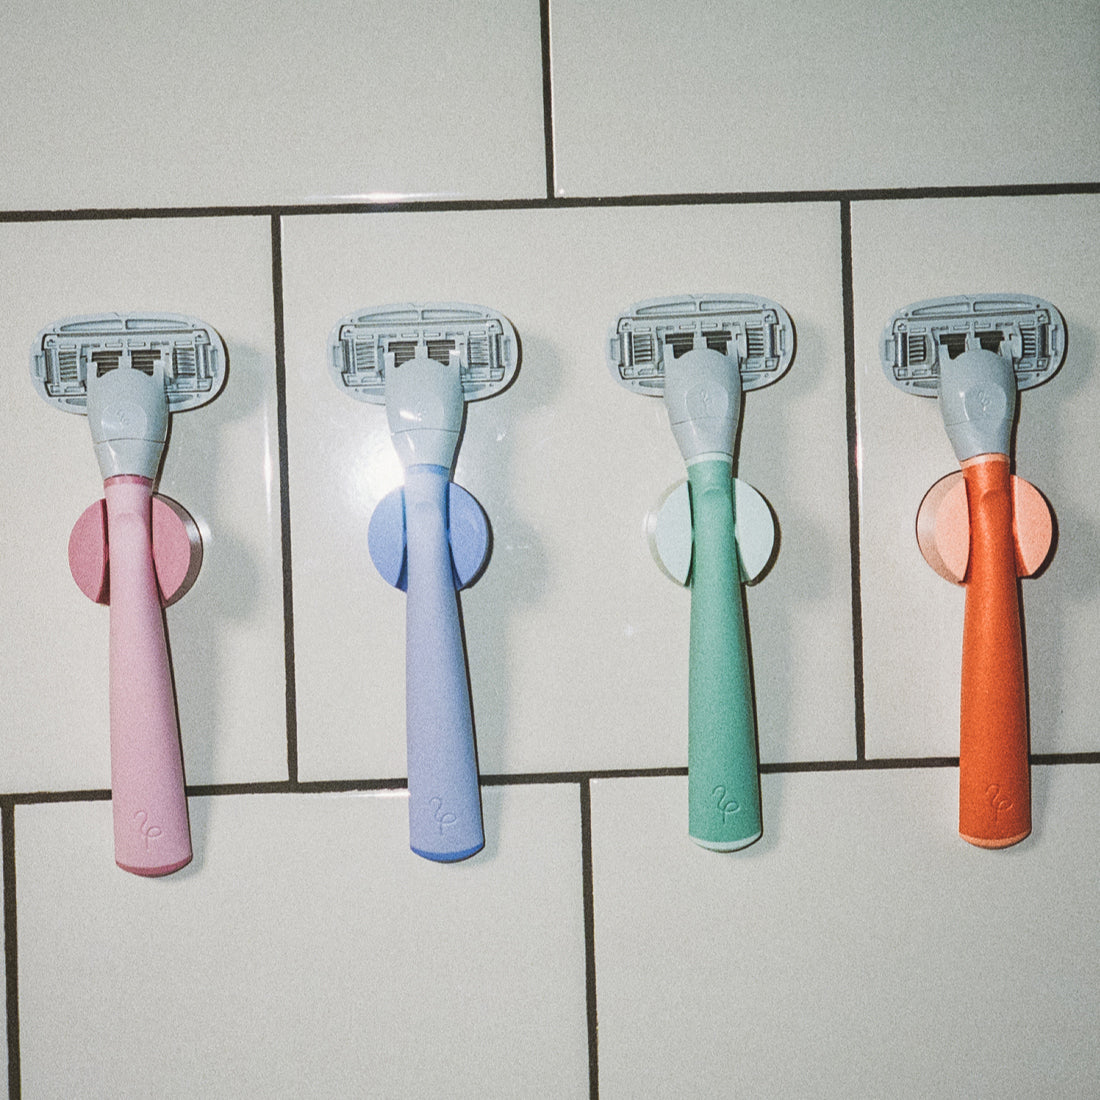 Rose, Lilac, Sage, and Papaya Flamingo Razors in their color coordinated shower holders on a tile bathroom wall